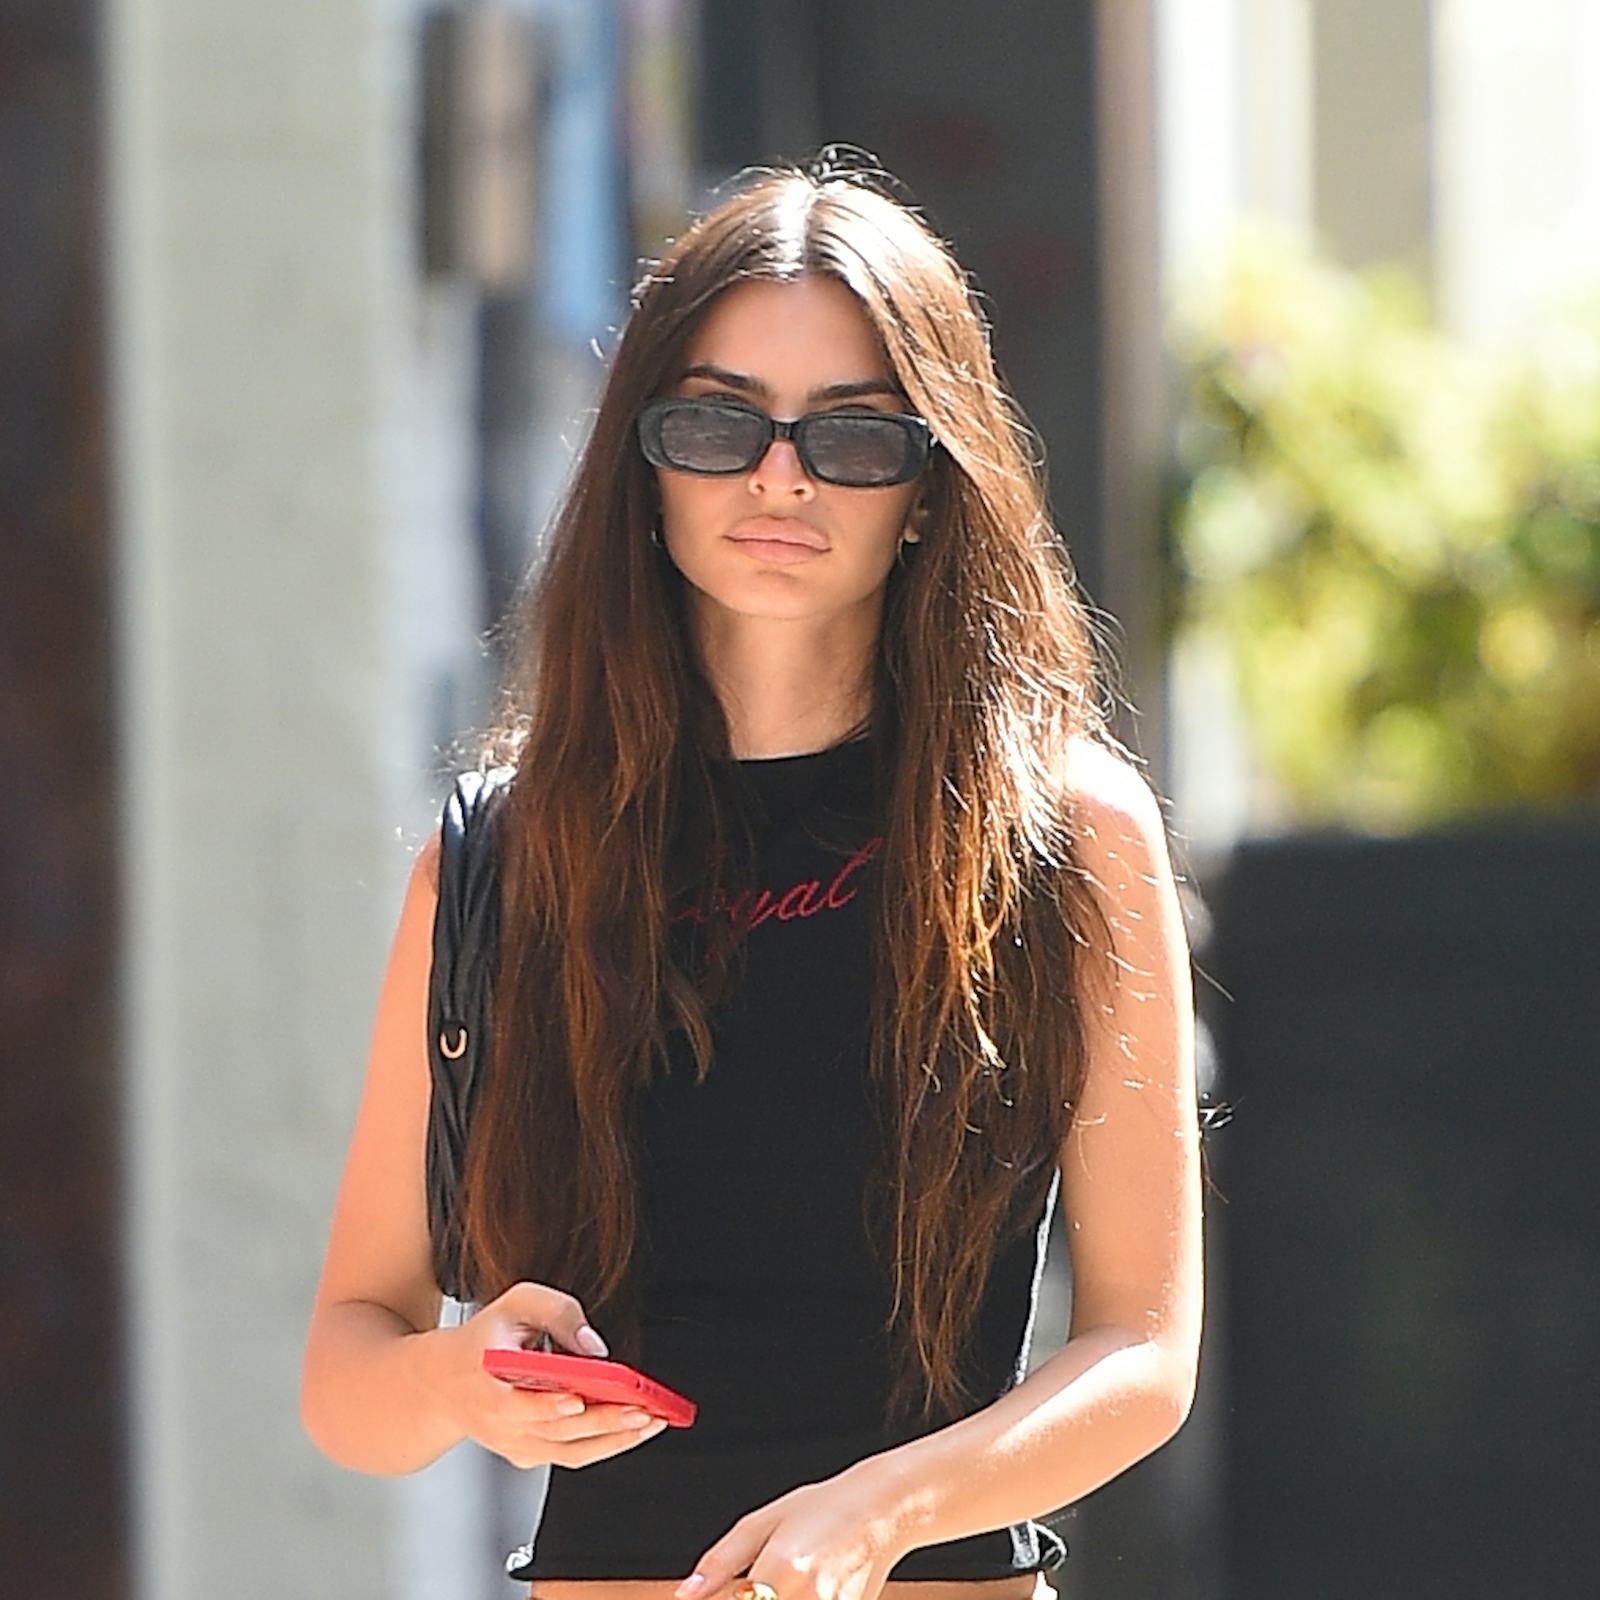 Emily Ratajkowski Ditched Her Sweats For This Sexier Look While Walking Her Dog